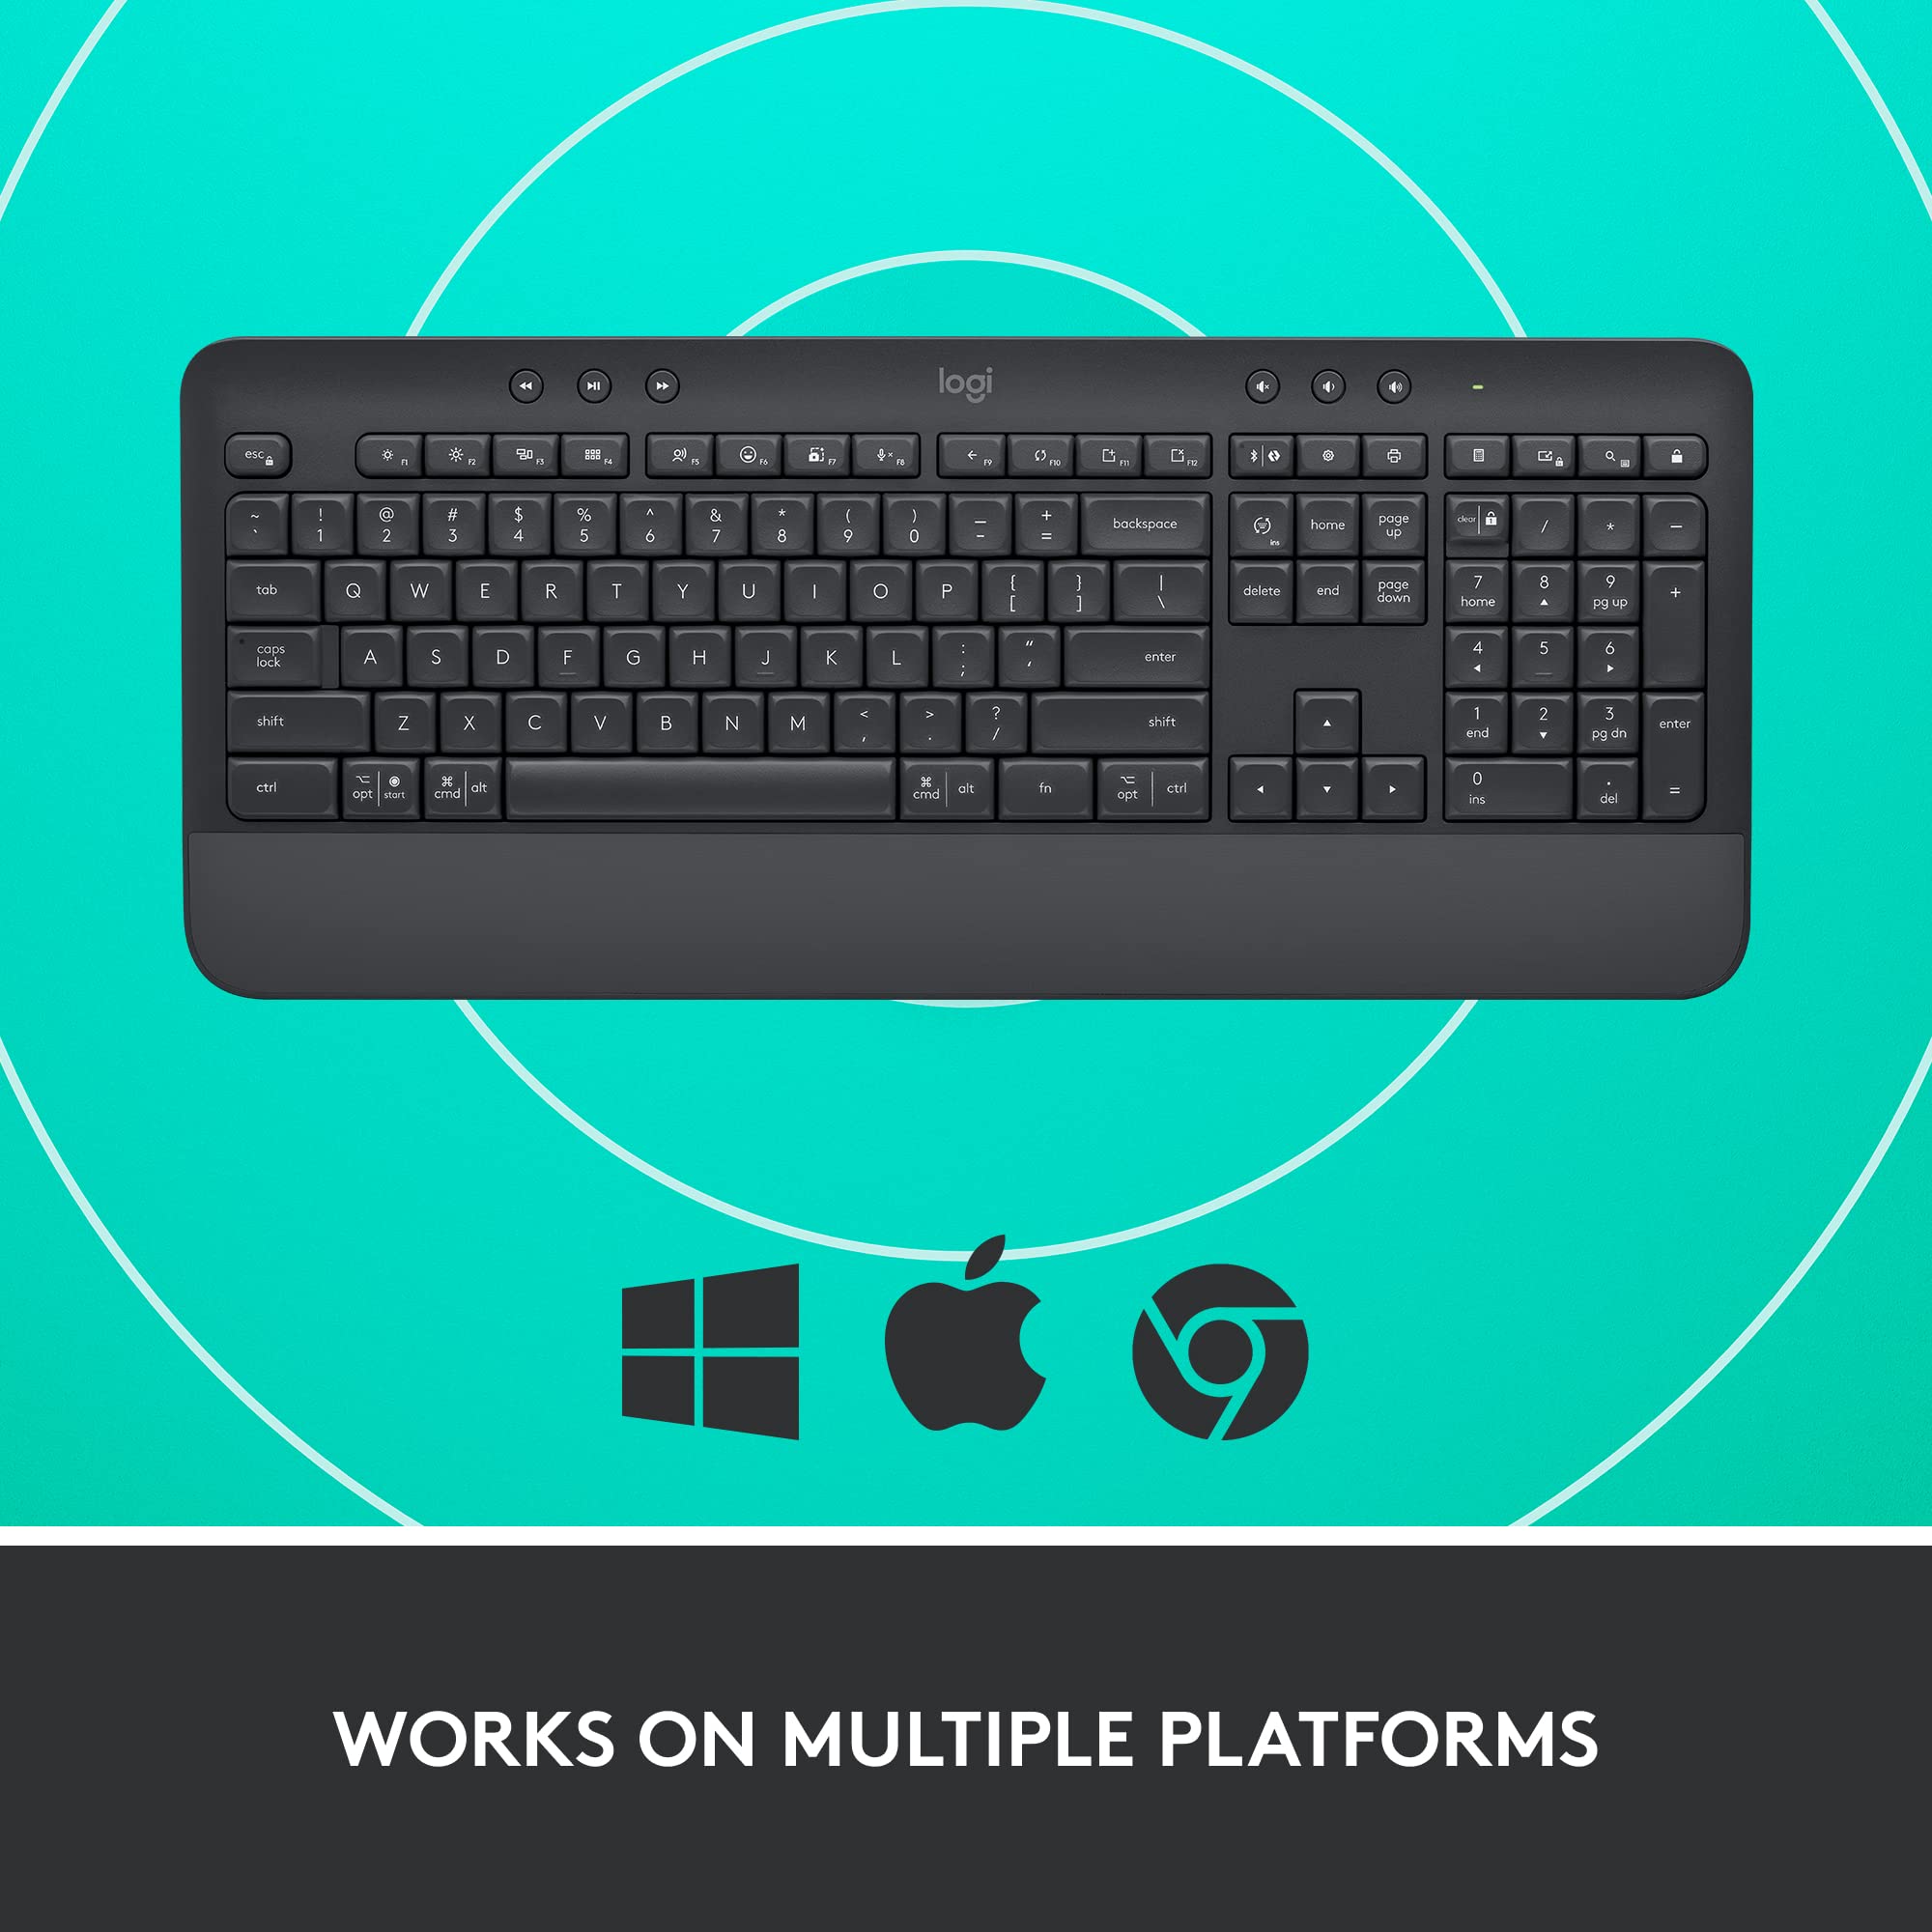 Logitech Signature K650 Comfort Full-Size Wireless Keyboard with Wrist Rest, BLE Bluetooth or Logi Bolt USB Receiver, Deep-Cushioned Keys, Numpad, Compatible with Most OS/PC/Window/Mac - Graphite